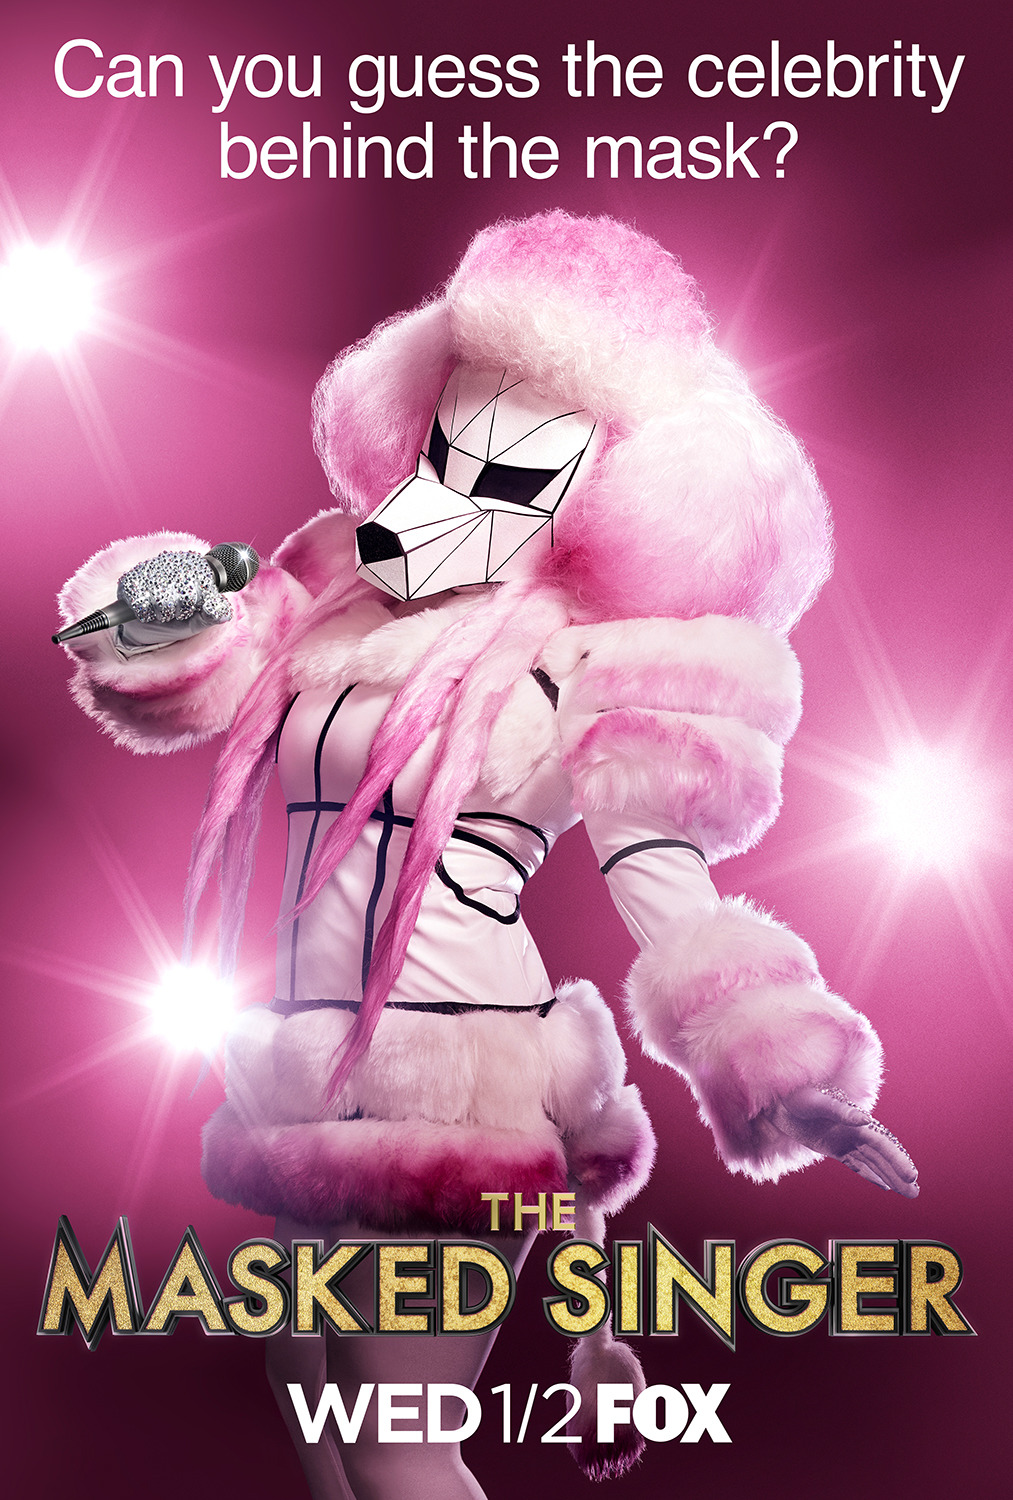 Extra Large TV Poster Image for The Masked Singer (#3 of 17)